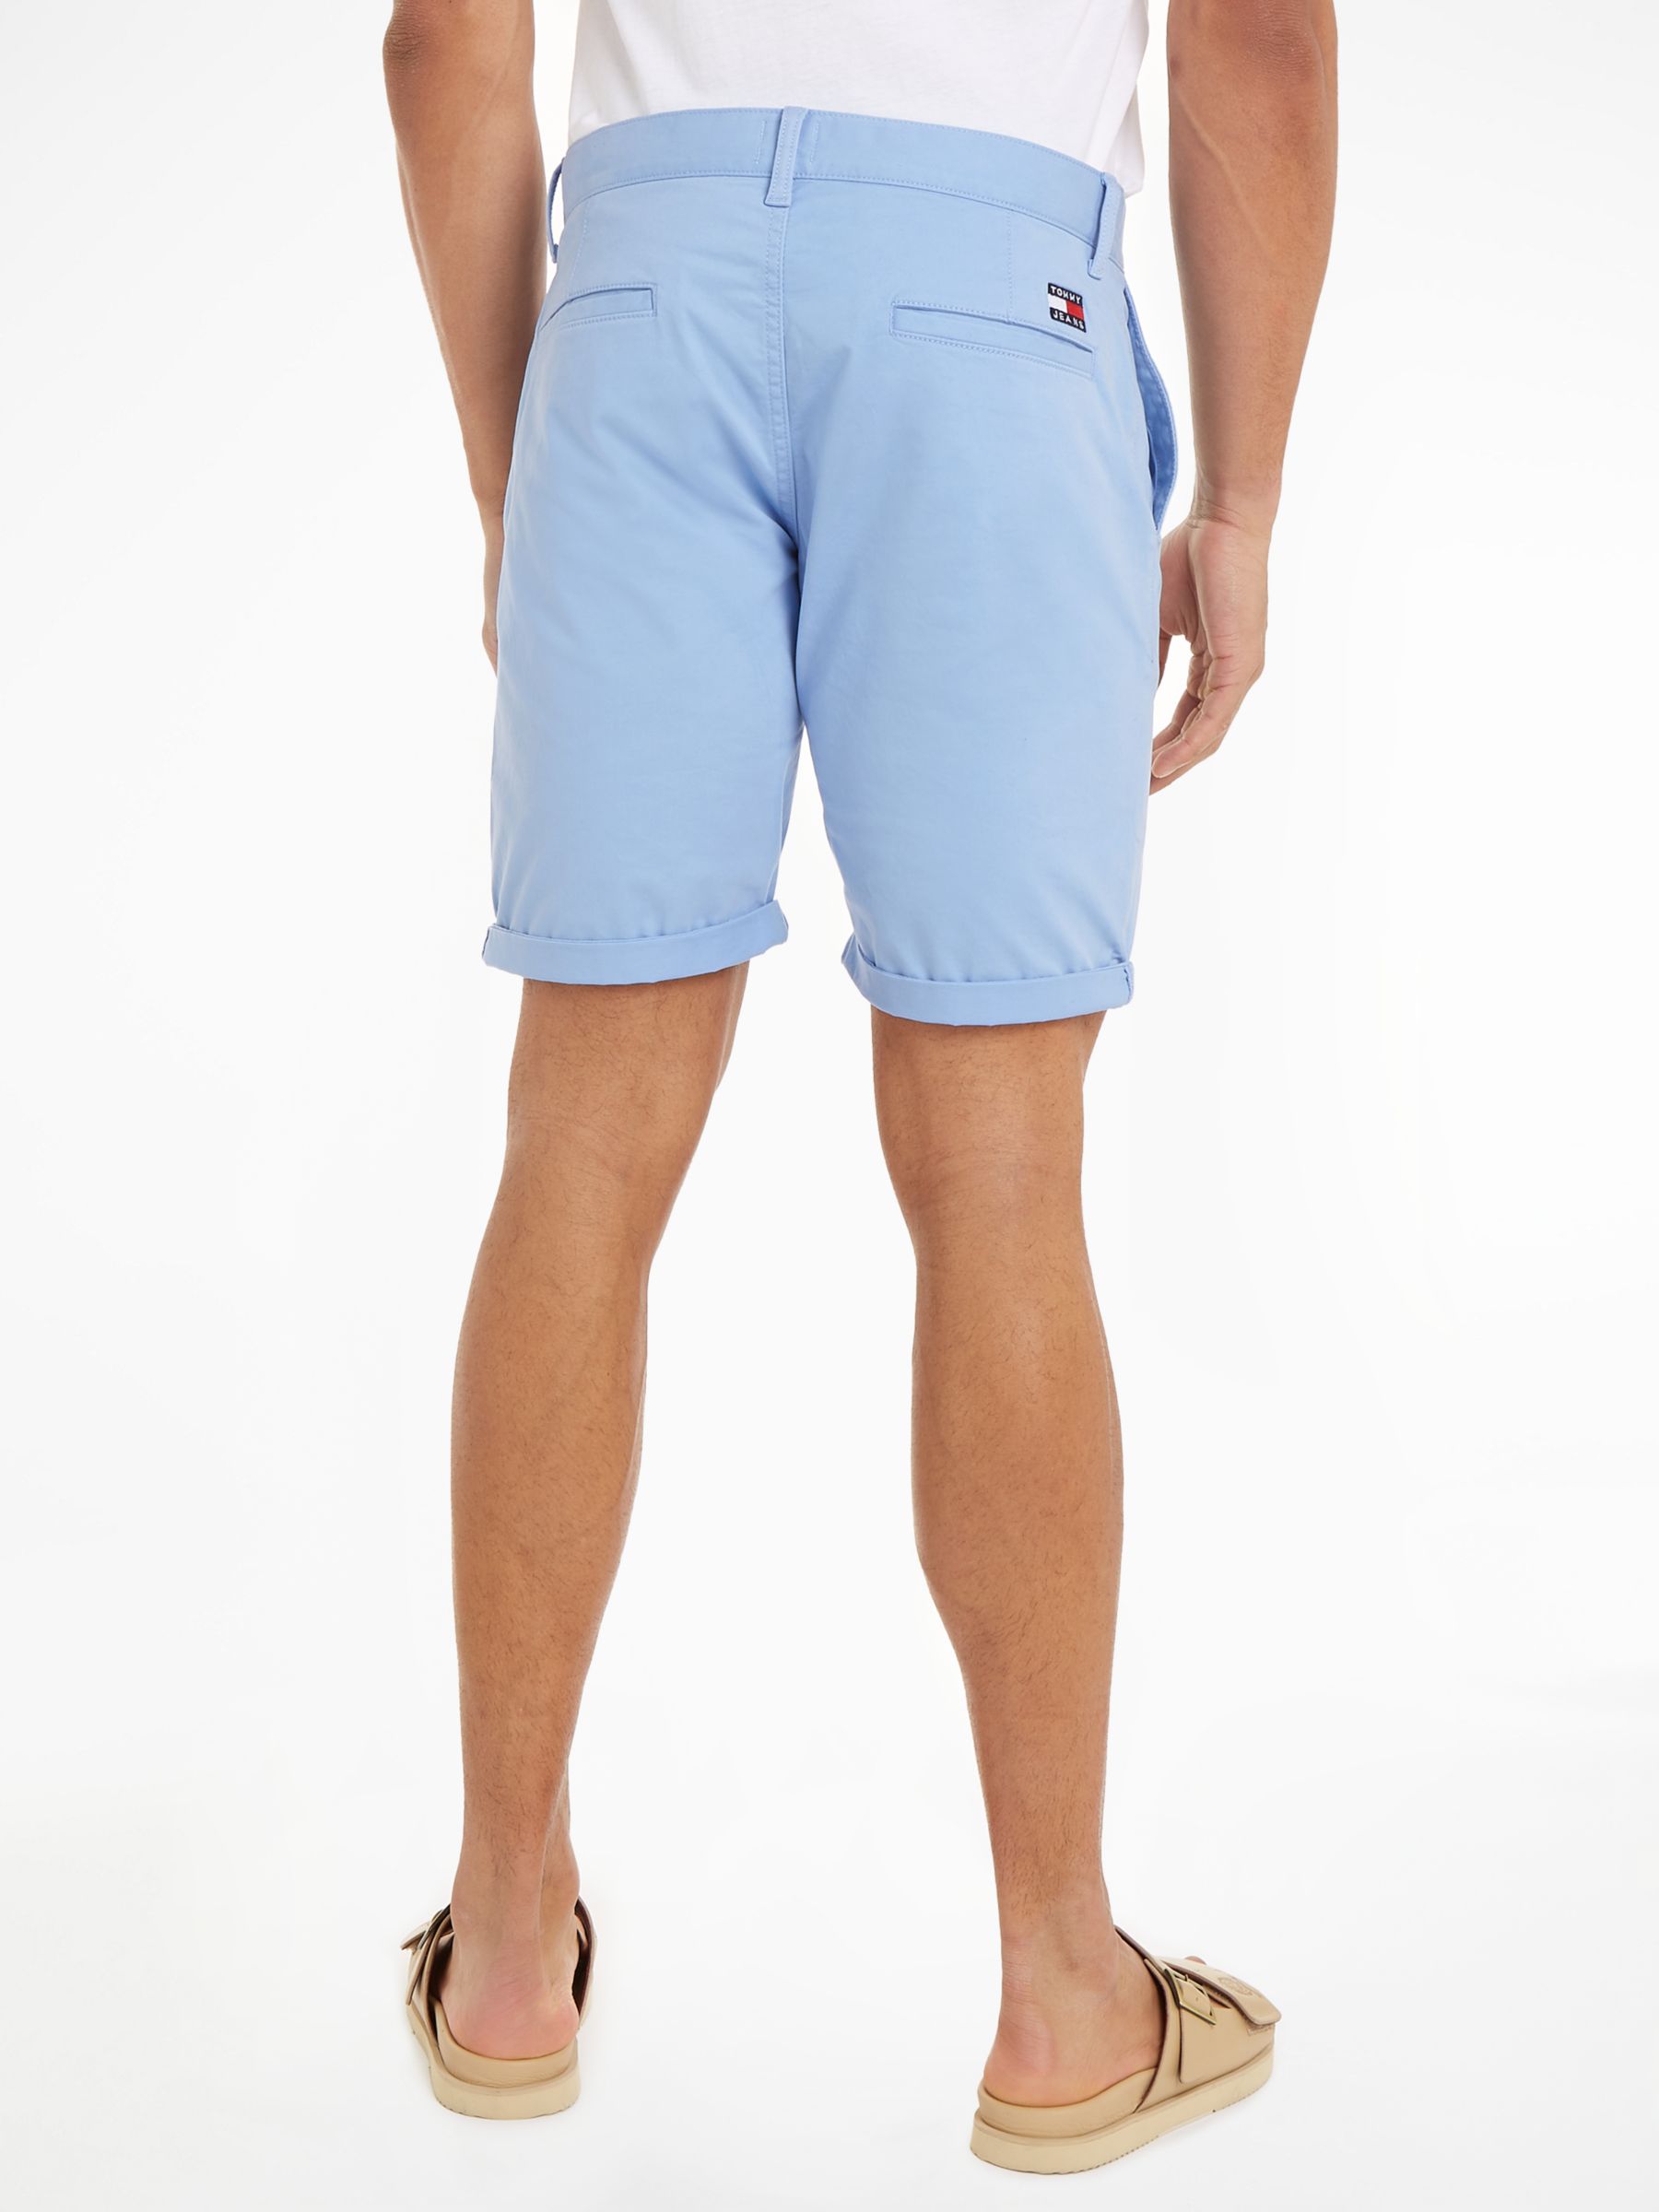 Tommy Jeans Scanton Chino Shorts, Moderate Blue, 30R